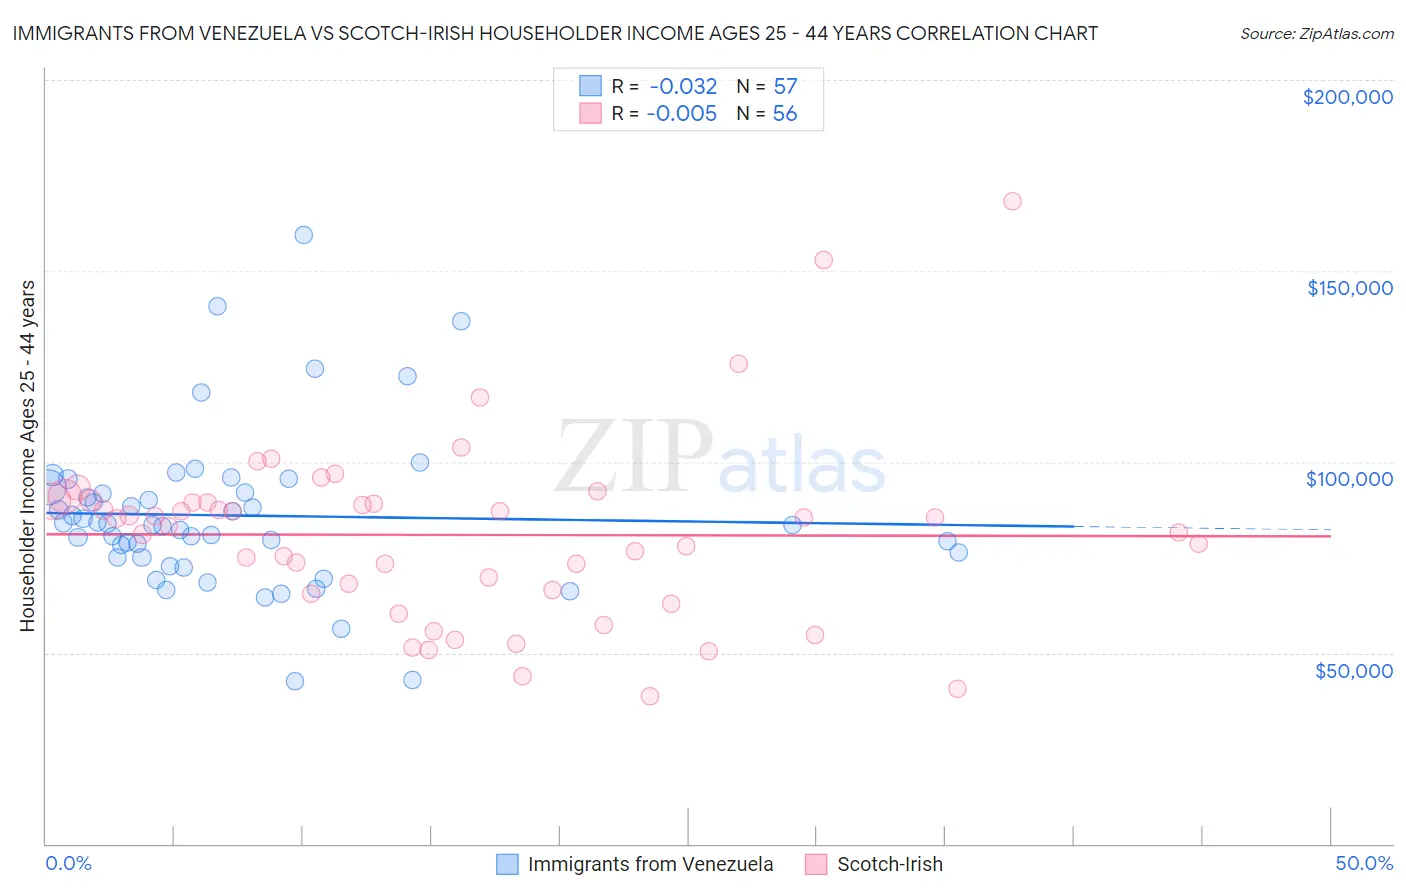 Immigrants from Venezuela vs Scotch-Irish Householder Income Ages 25 - 44 years